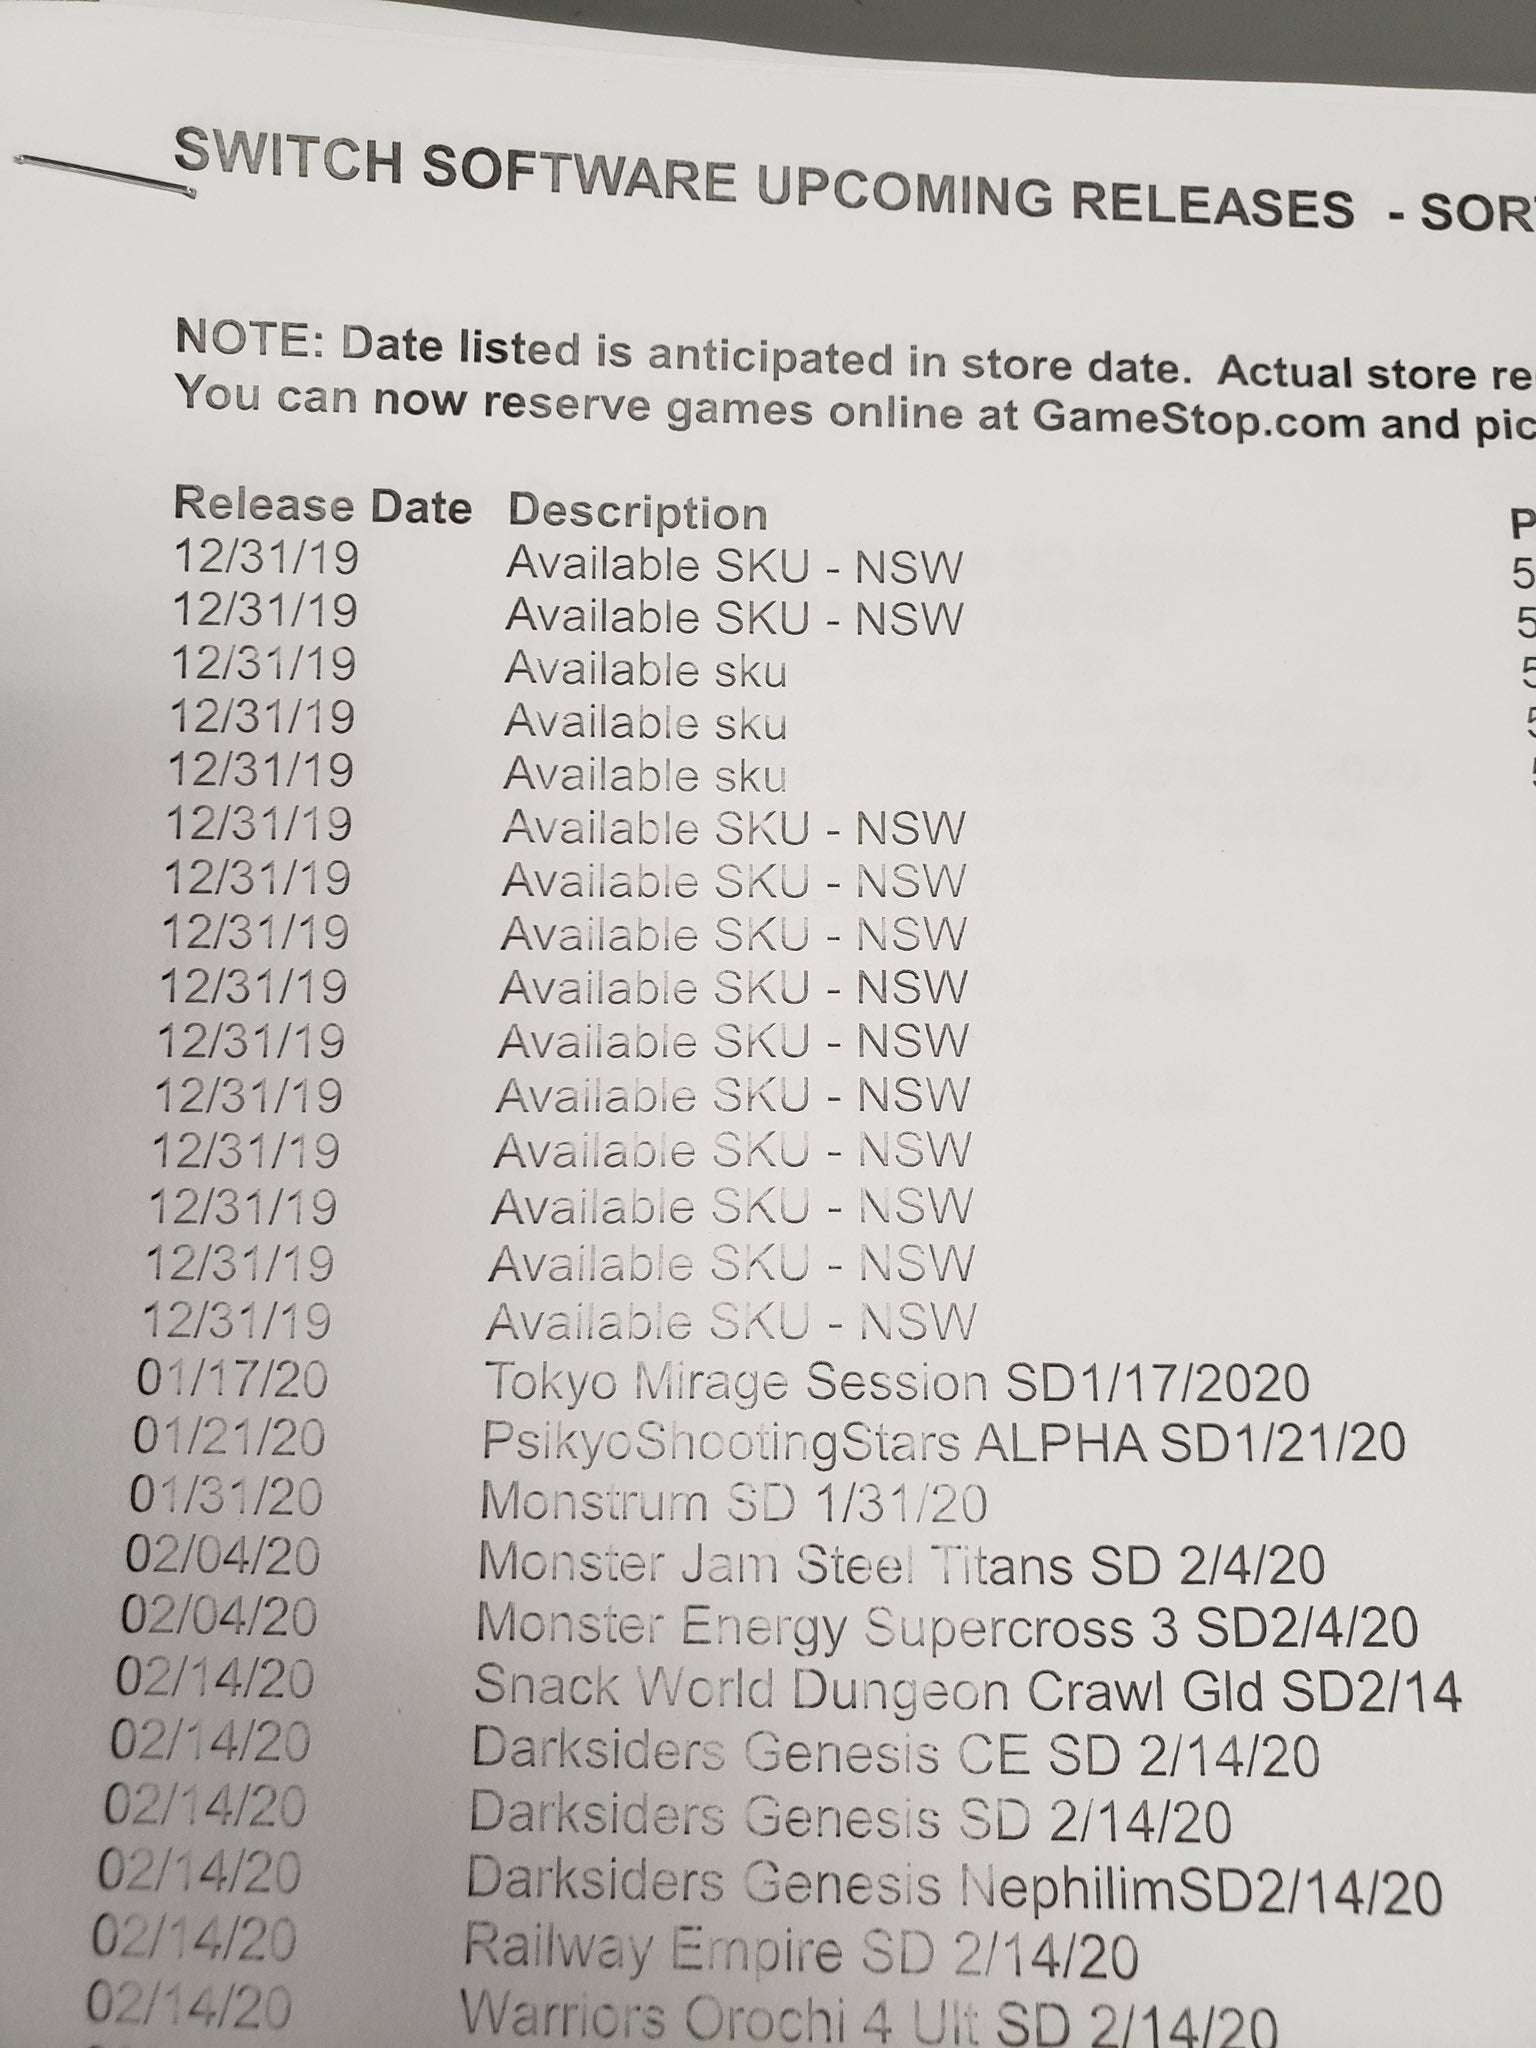 image for Master Of Hype auf Twitter: "GameStop system doing it’s usual pre-direct new SKU listings 😏. We starting 2020 strong 👀~… "